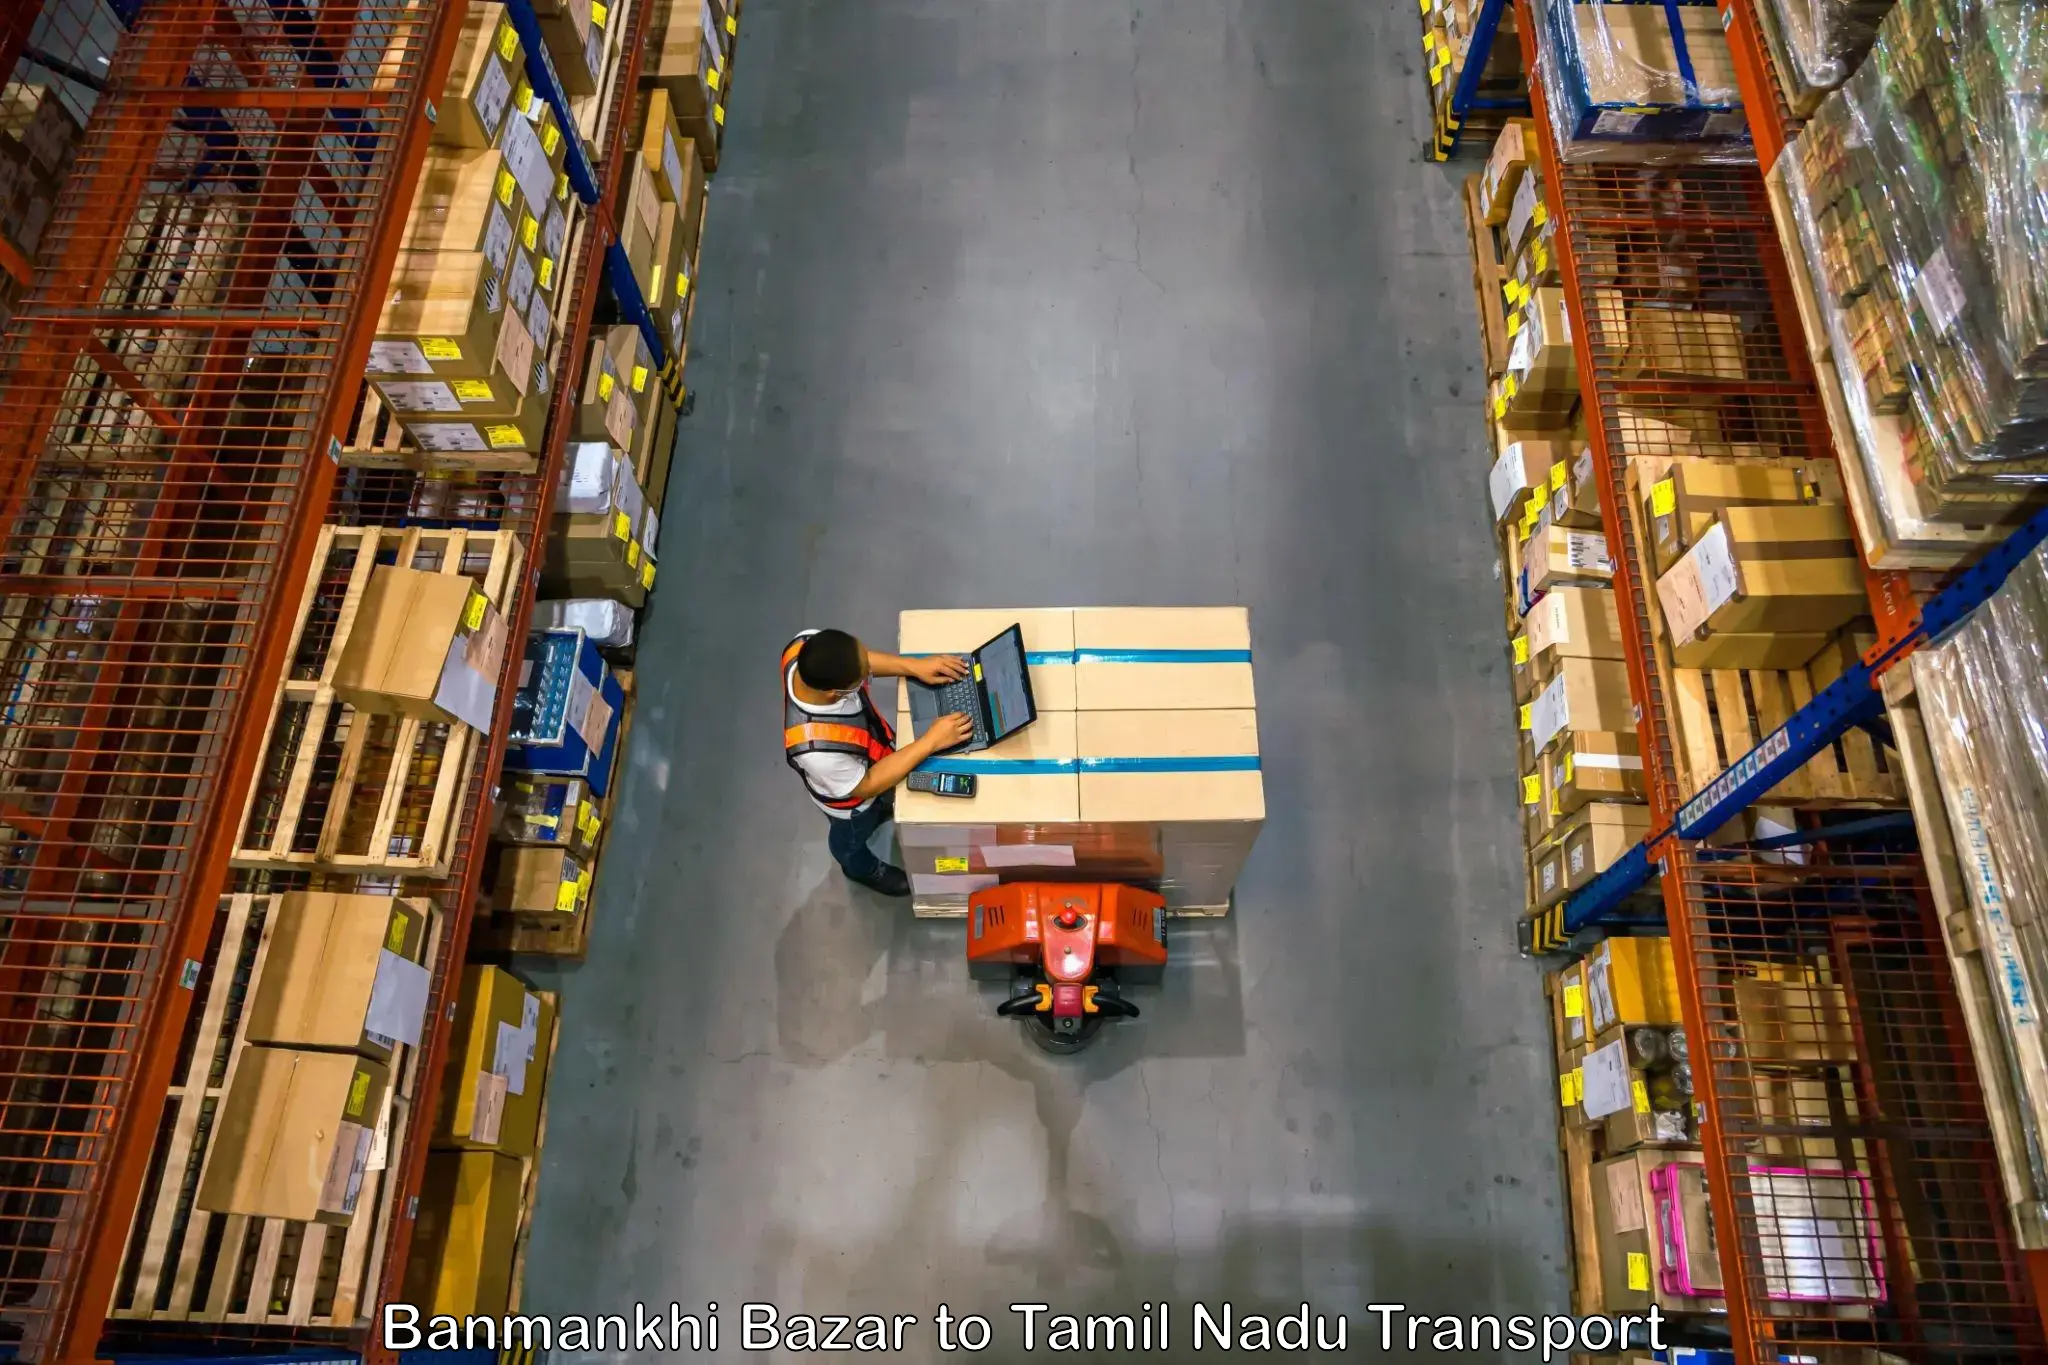 Goods delivery service Banmankhi Bazar to Tambaram